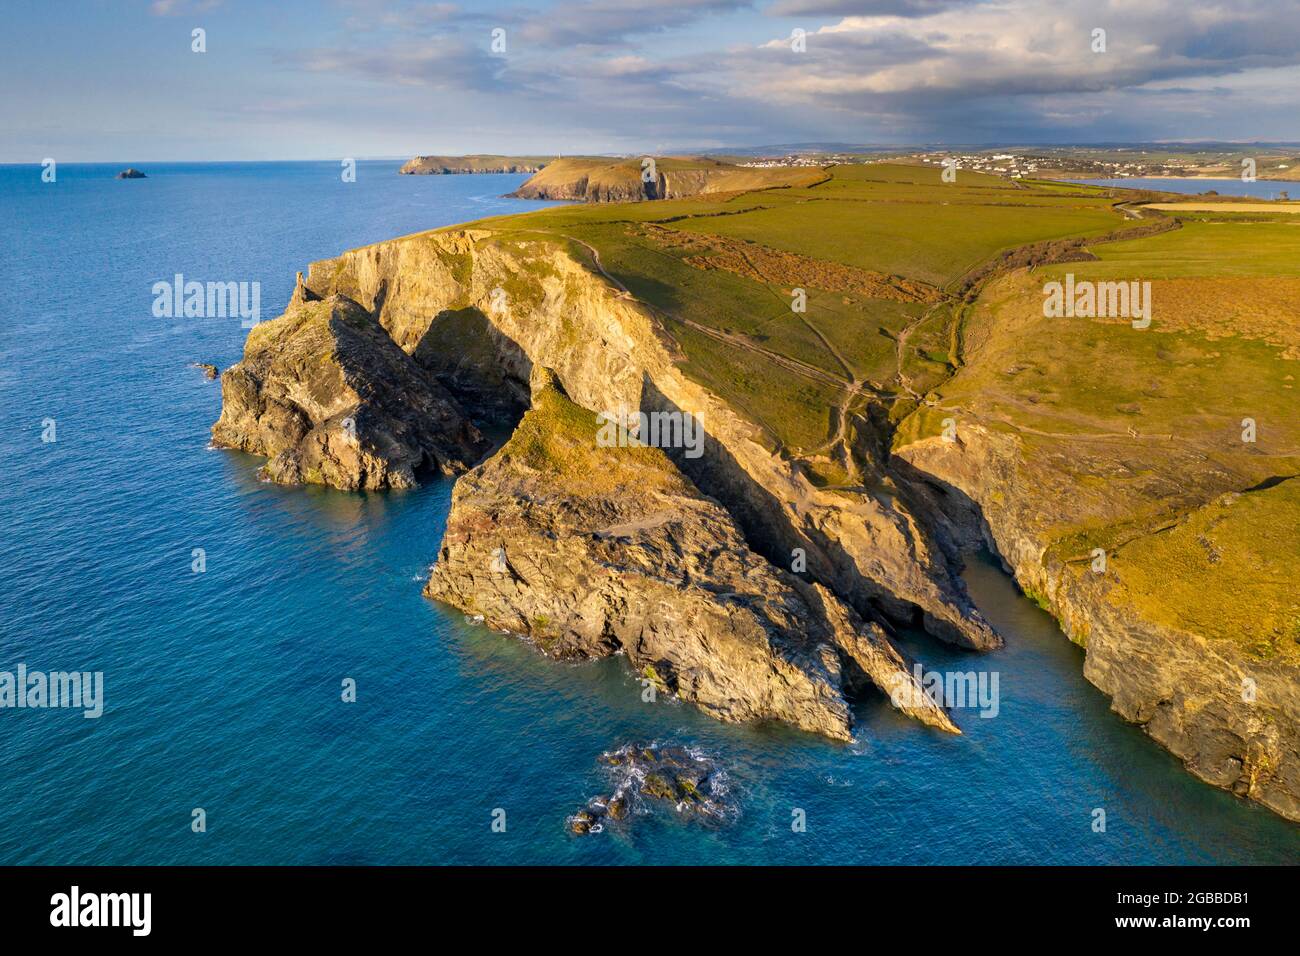 Aerial vista of Merope Islands and dramatic cliffs near Stepper Point in spring, Padstow, Cornwall, England, United Kingdom, Europe Stock Photo